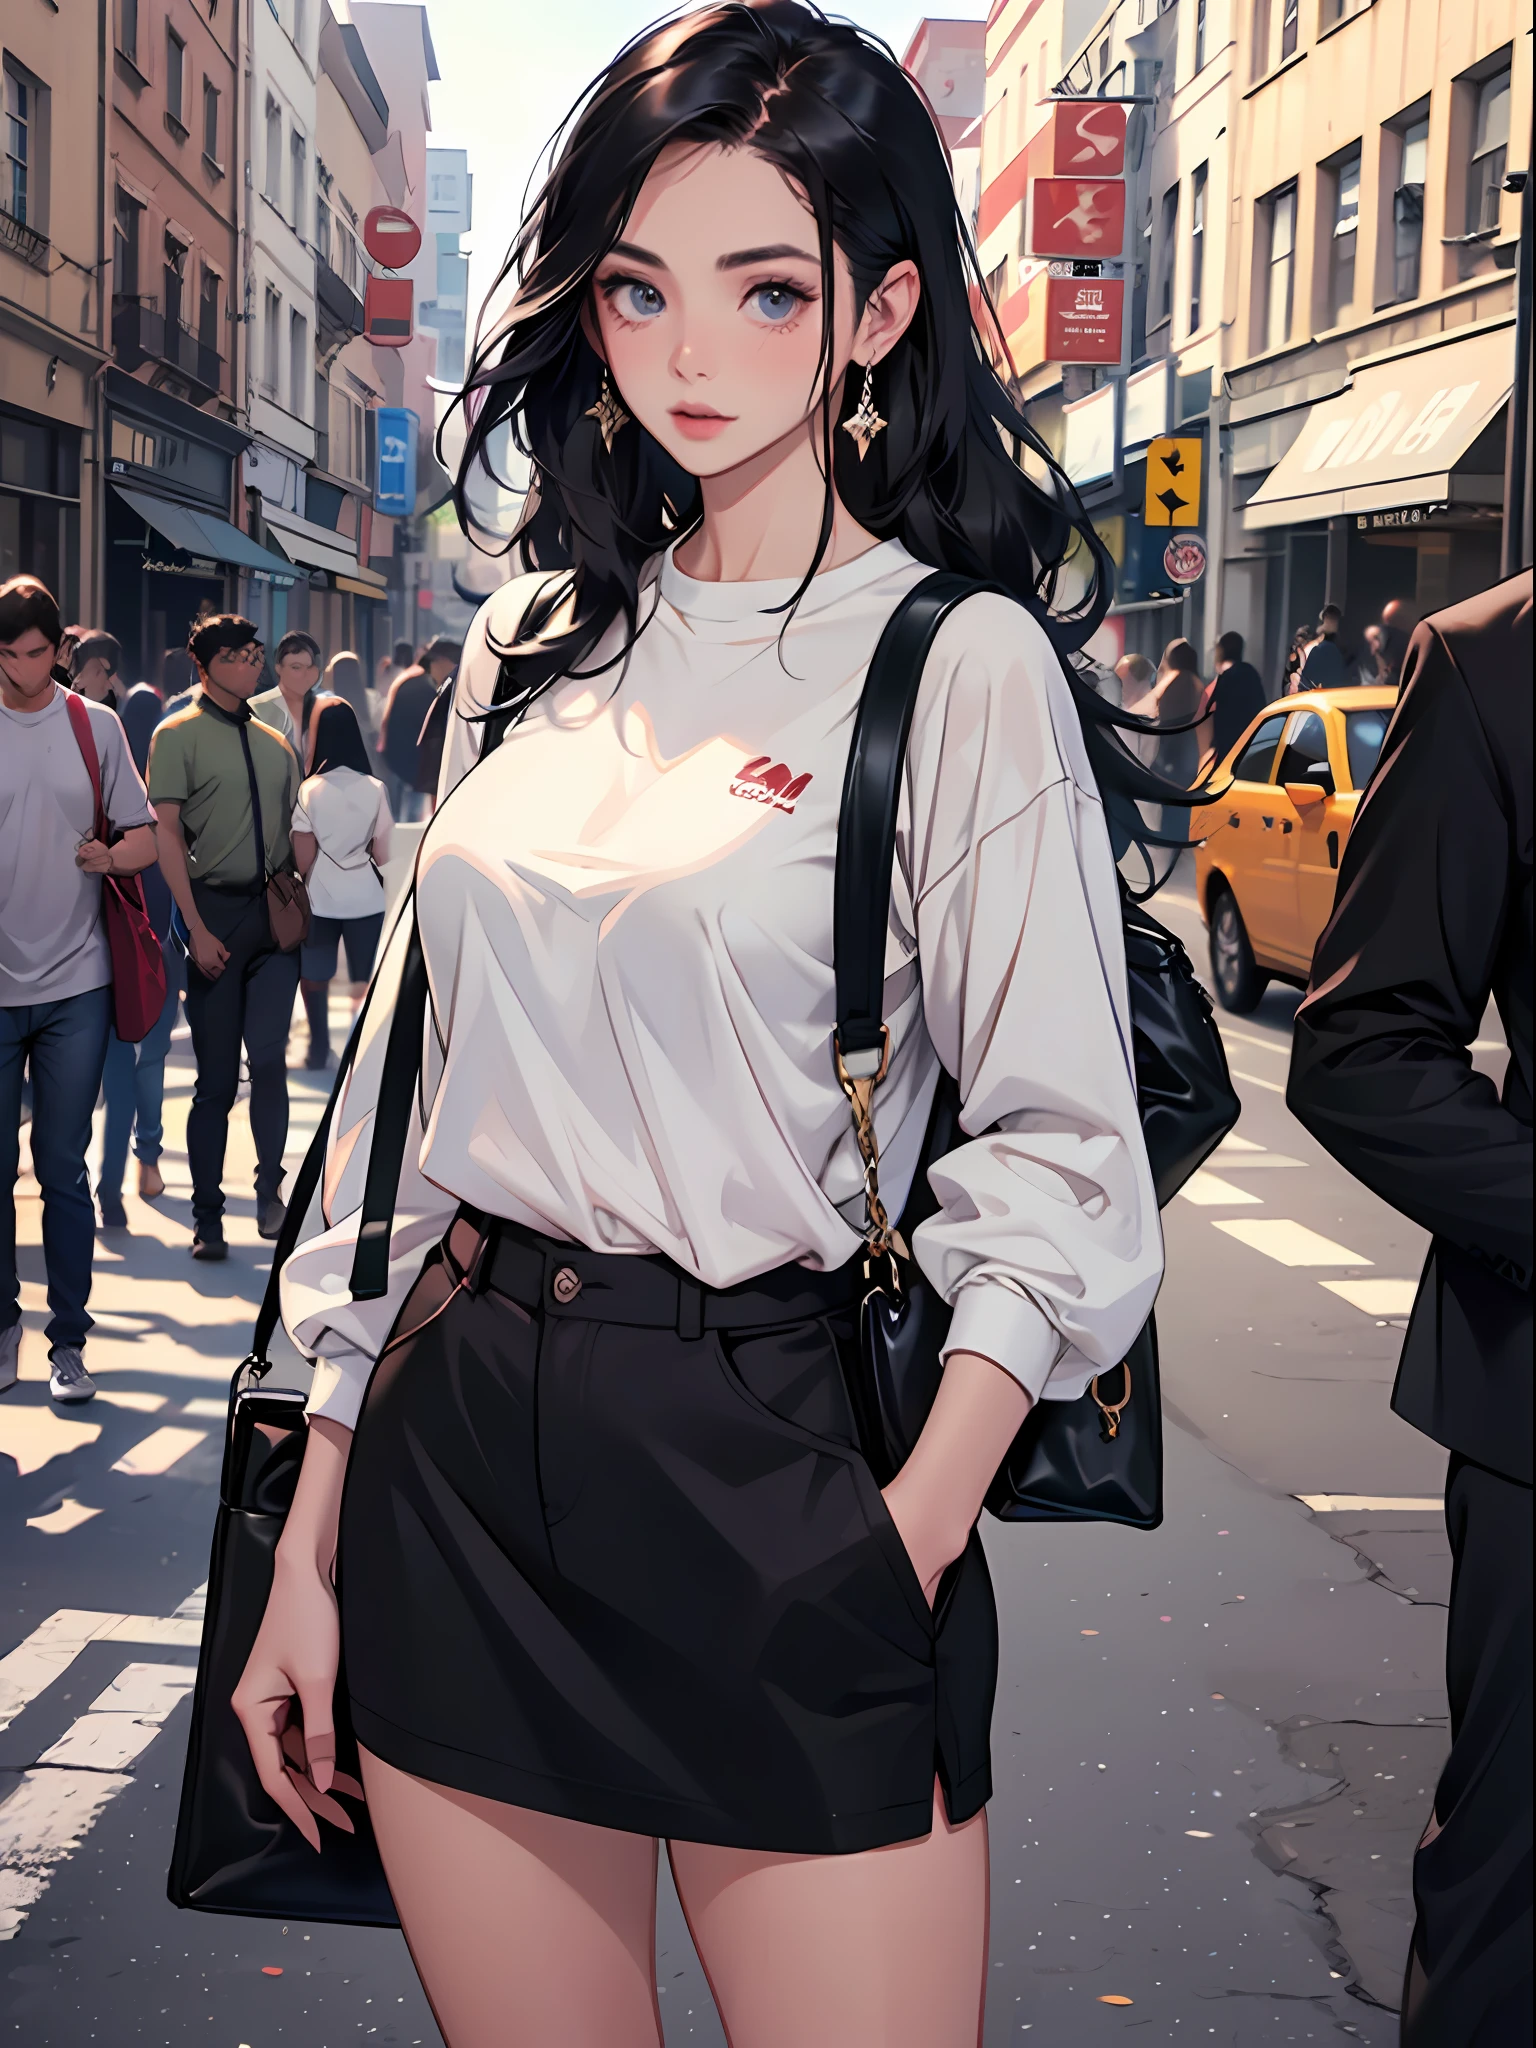 Young woman 25 years: 1.3, Long black hair: 1.2, Casual wear: 1.2, Daytime: 1.2, On the street: 1.2, Film lighting, Surrealism, UHD, ccurate, Super detail, textured leather, slightly tanned skin, dark eyes, High detail, Best quality, 8k